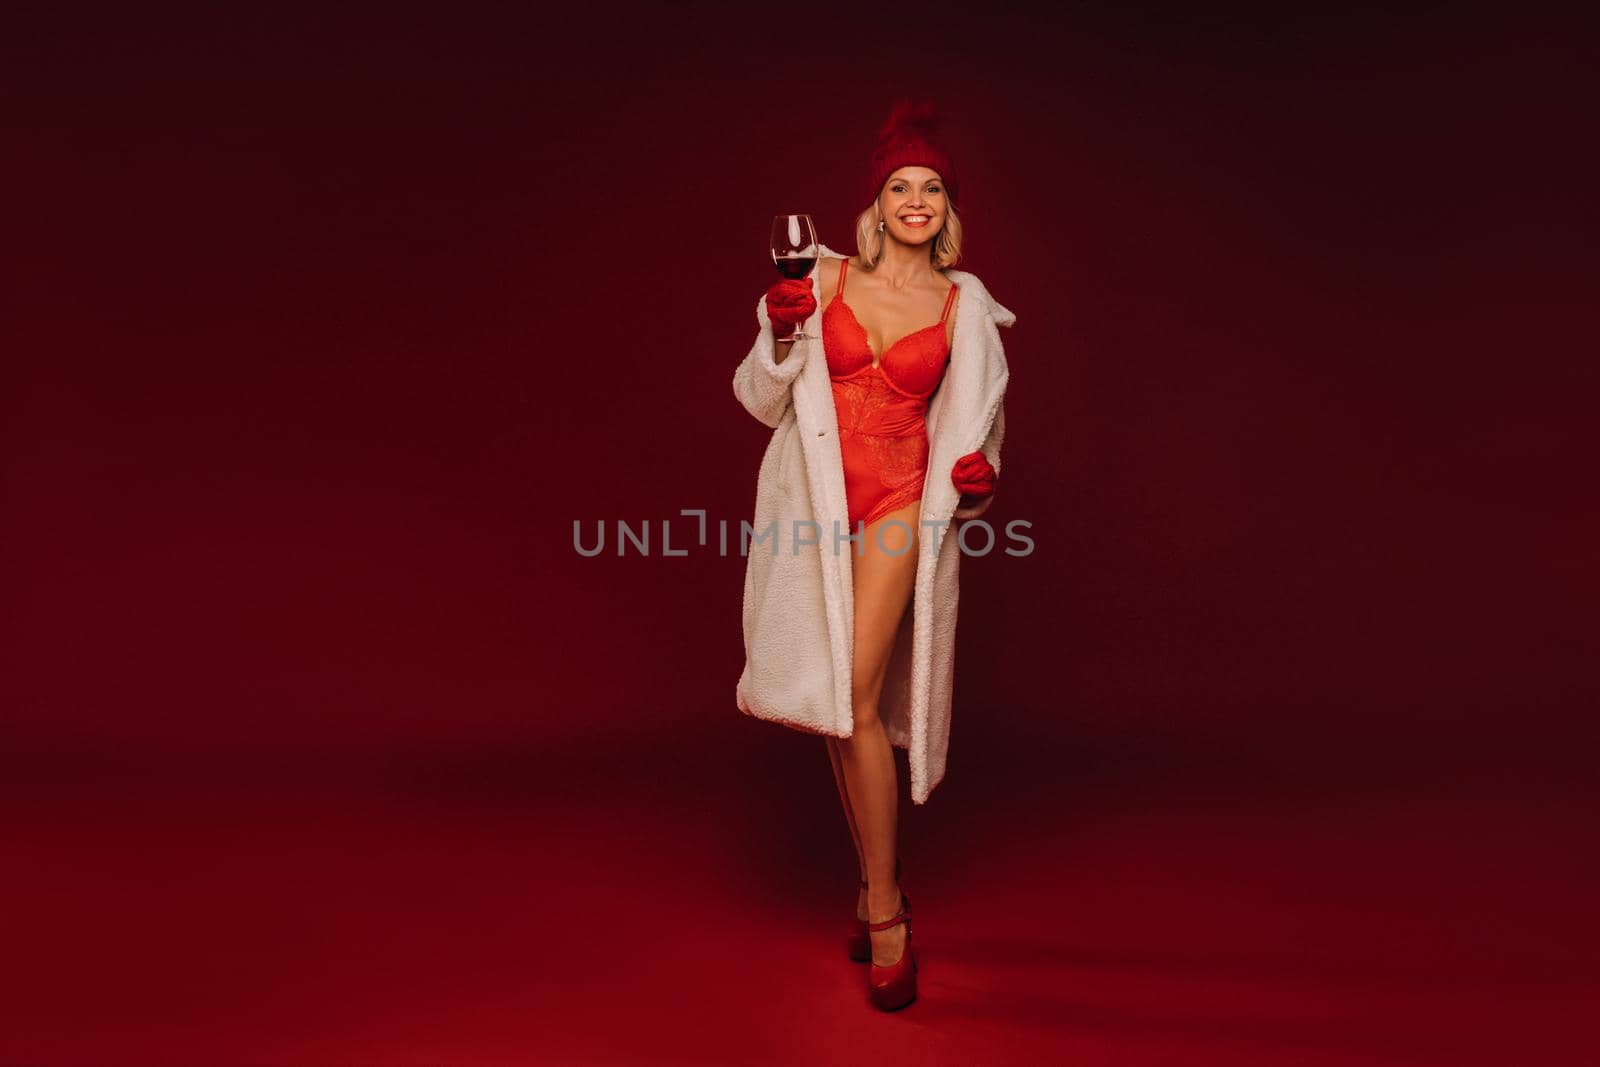 portrait of a smiling girl in a white fur coat and underwear holding a glass of champagne on a red background by Lobachad